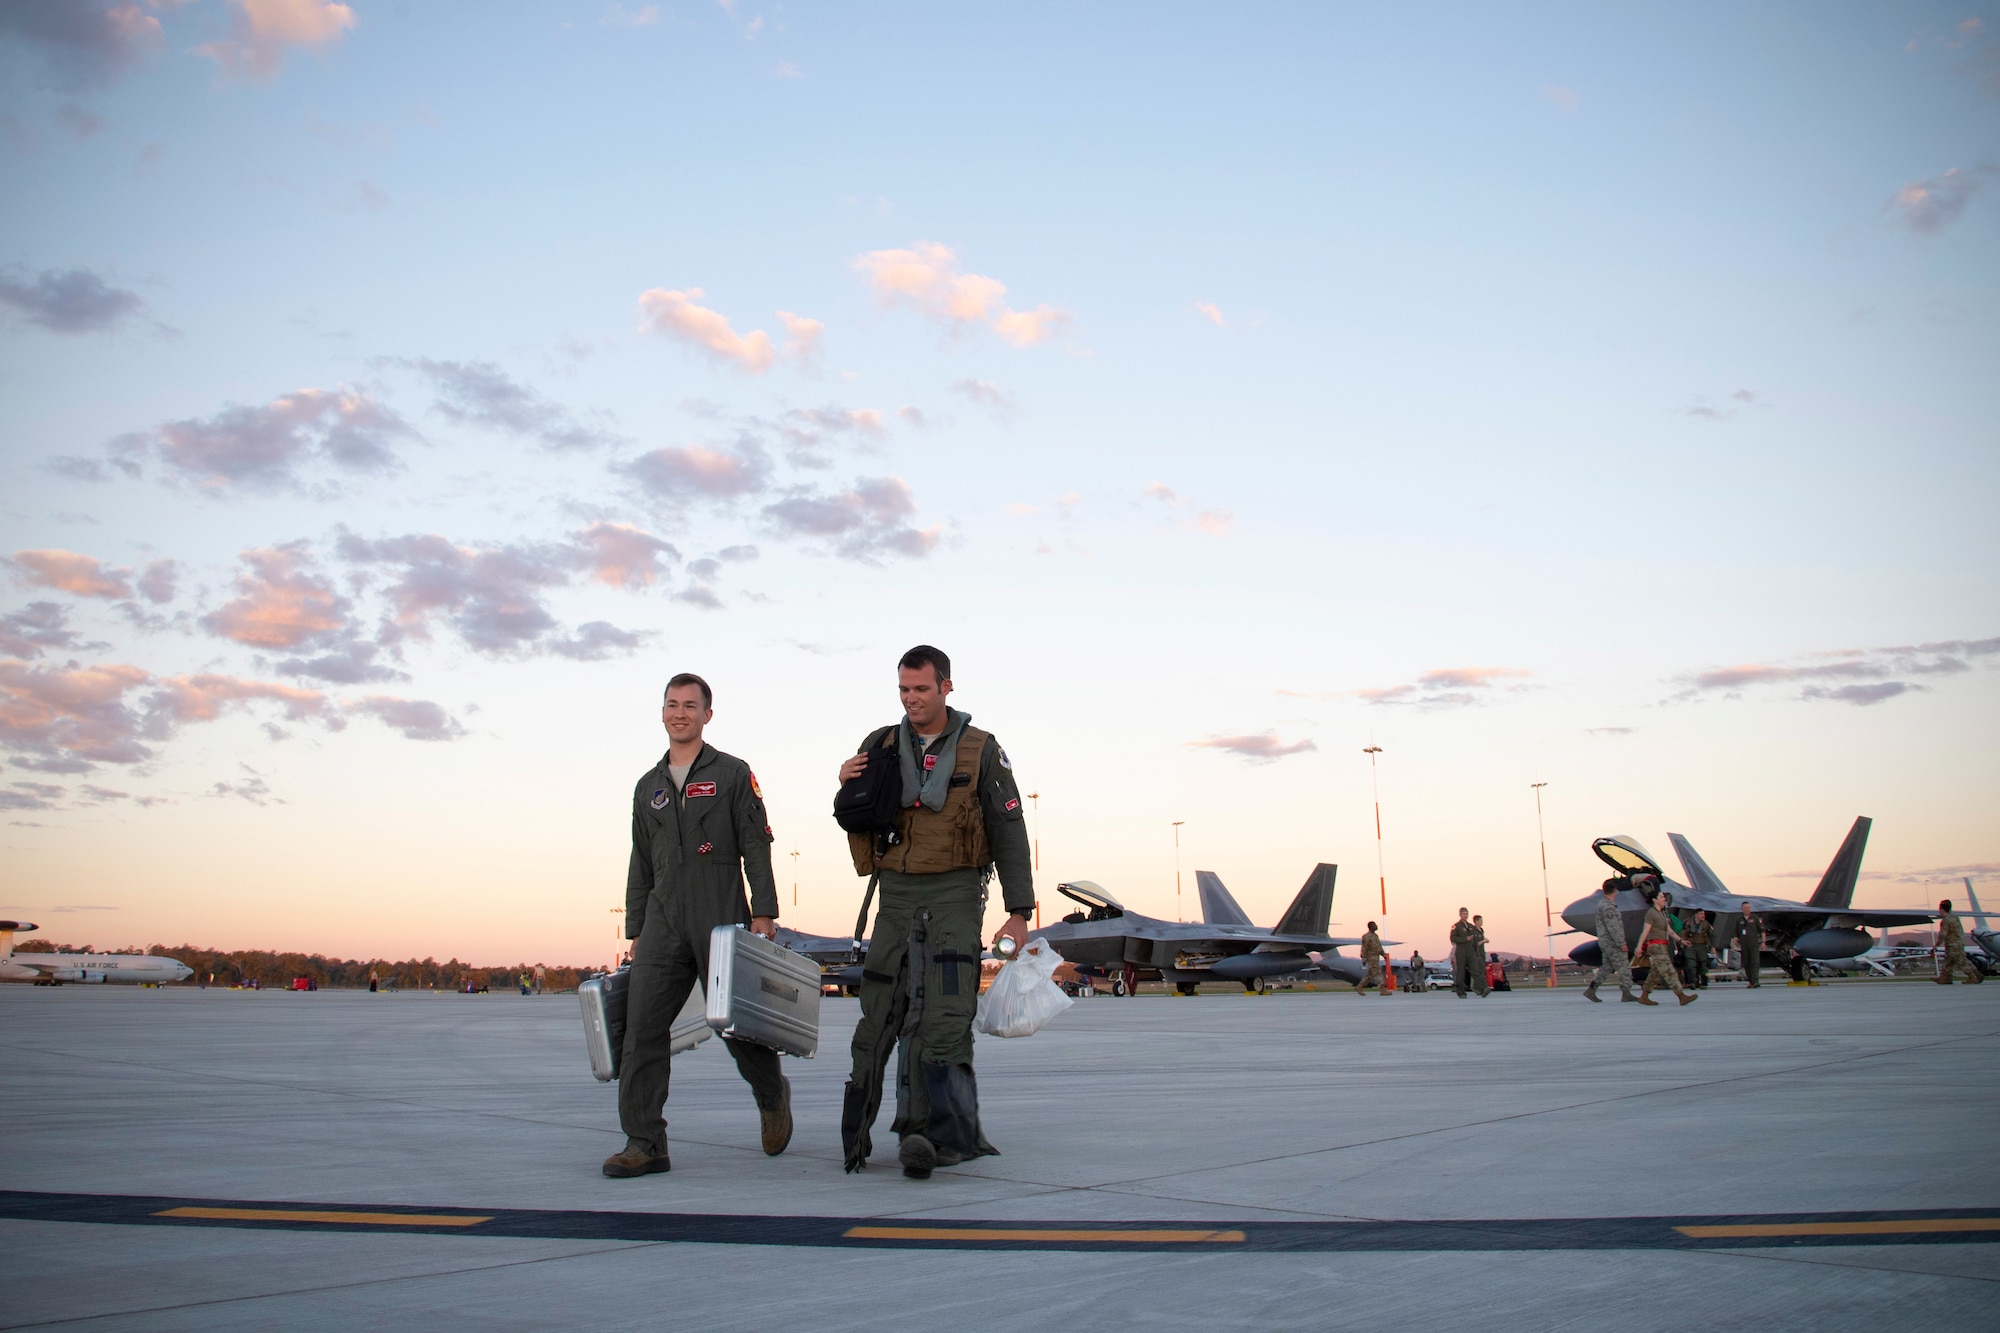 U.S. Air Force Lt. Col. Ryan Graf, 90th Fighter Squadron commander, right, and USAF Capt. Jonathan Weed, with the 90 FS, Joint Base Elmendorf-Richardson, Alaska, depart the flightline after arriving July 9, to Royal Australian Air Force Base Amberley, Australia, in support of Talisman Sabre 19. Talisman Sabre is a month-long exercise along the east coast of Australia that incorporates force members from Australia and the United States in amphibious landings, land force maneuver, urban operations, air operations, maritime operations and special forces activities. (U.S. Air Force photo by Senior Airman Elora J. Martinez)